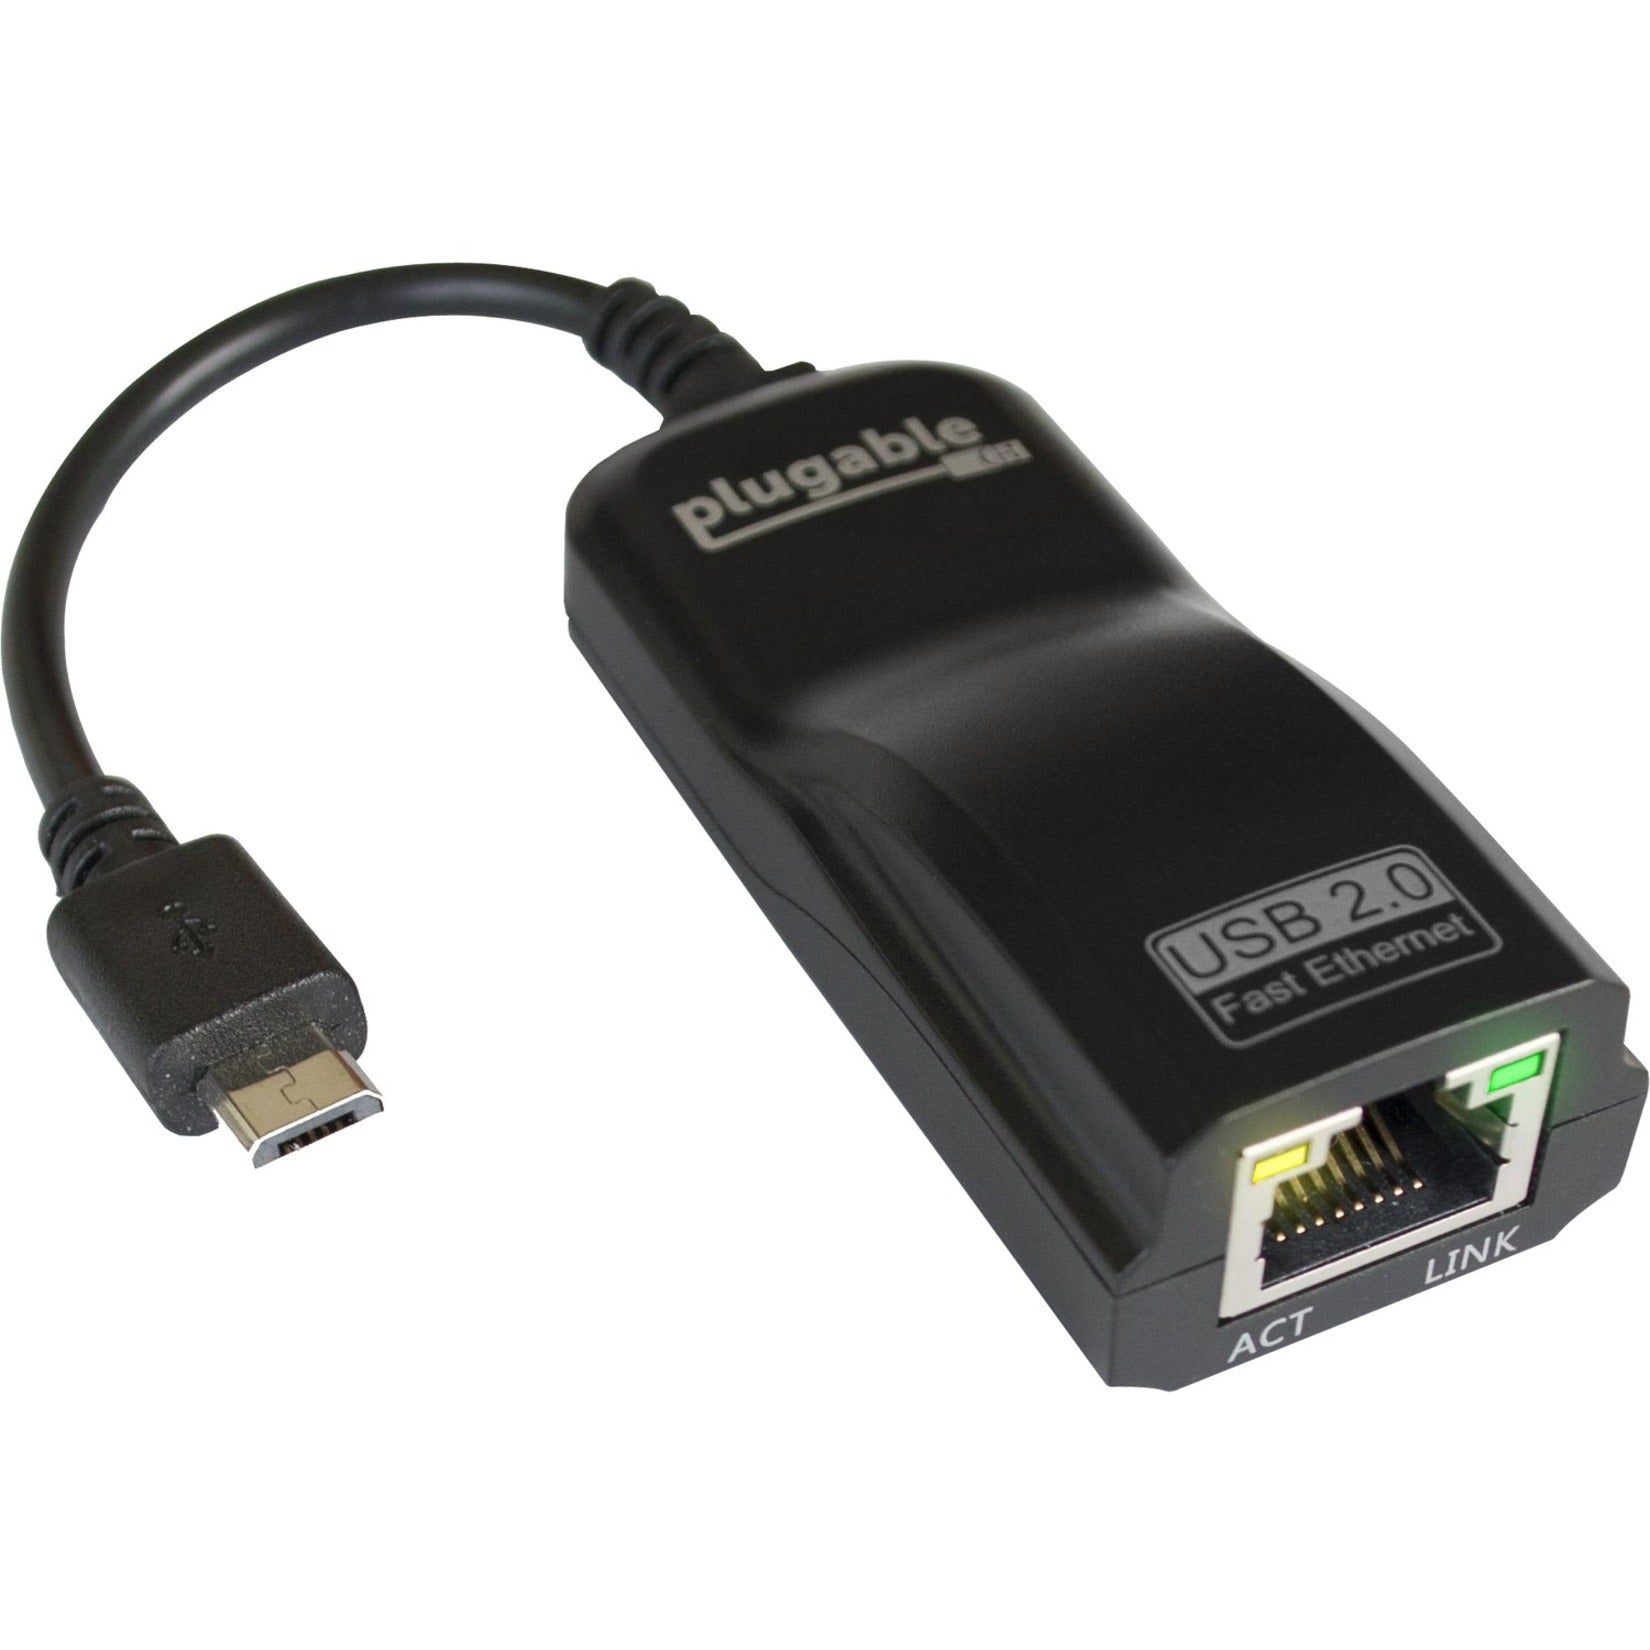 Plugable USB2-OTGE100 USB 2.0 OTG Micro-B to 100Mbps Fast Ethernet Adapter, Portable and Easy-to-Use